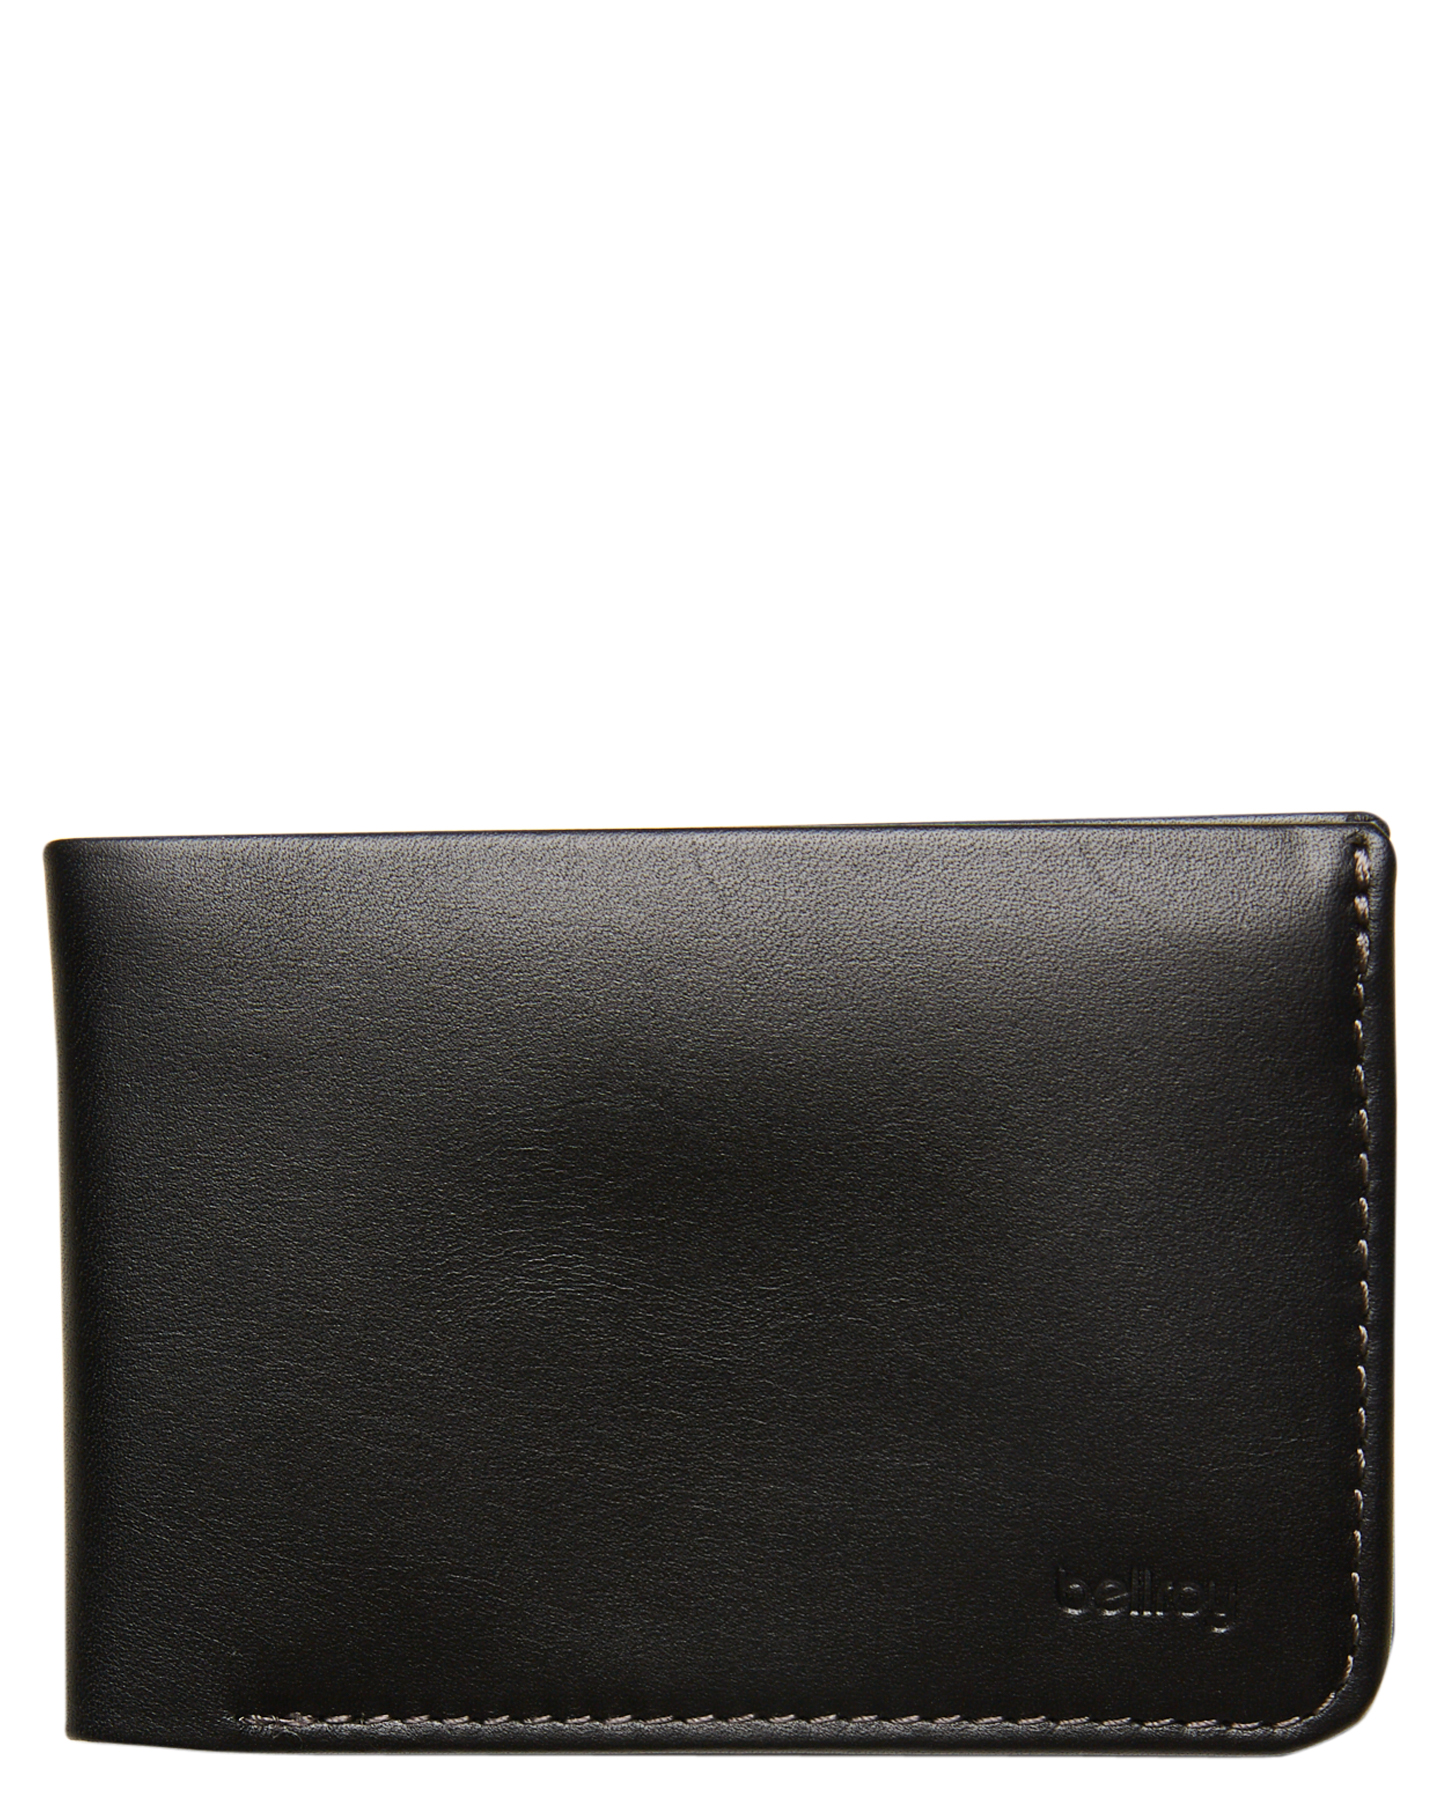 Bellroy The Low Wallet - Black | SurfStitch